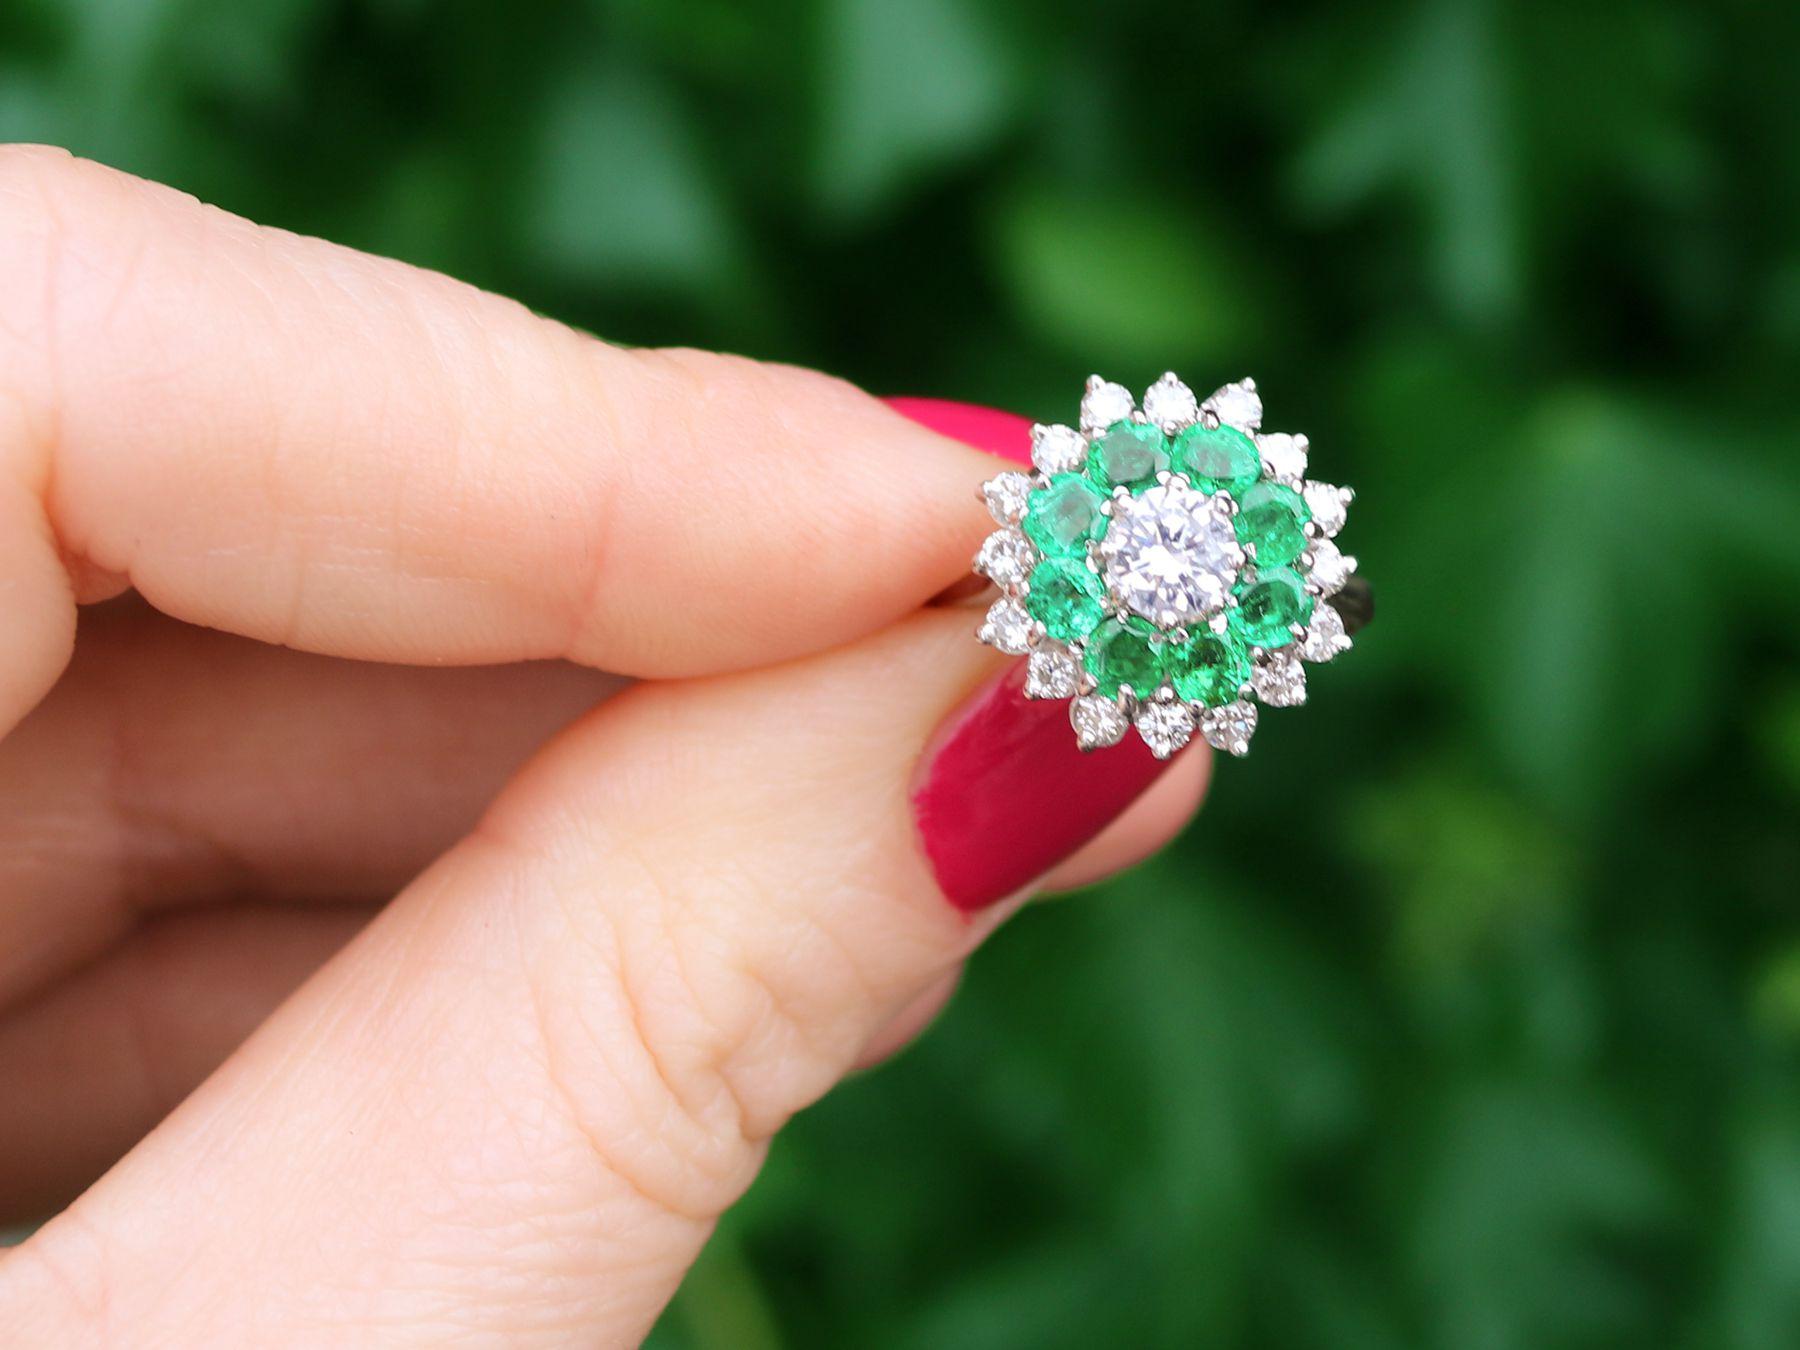 A fine and impressive vintage 0.98 carat emerald and 1.23 carat diamond, 18 karat white gold cocktail ring; part of our diverse range of gemstone jewelry

This impressive emerald cluster ring has been crafted in 18k white gold.

The substantial